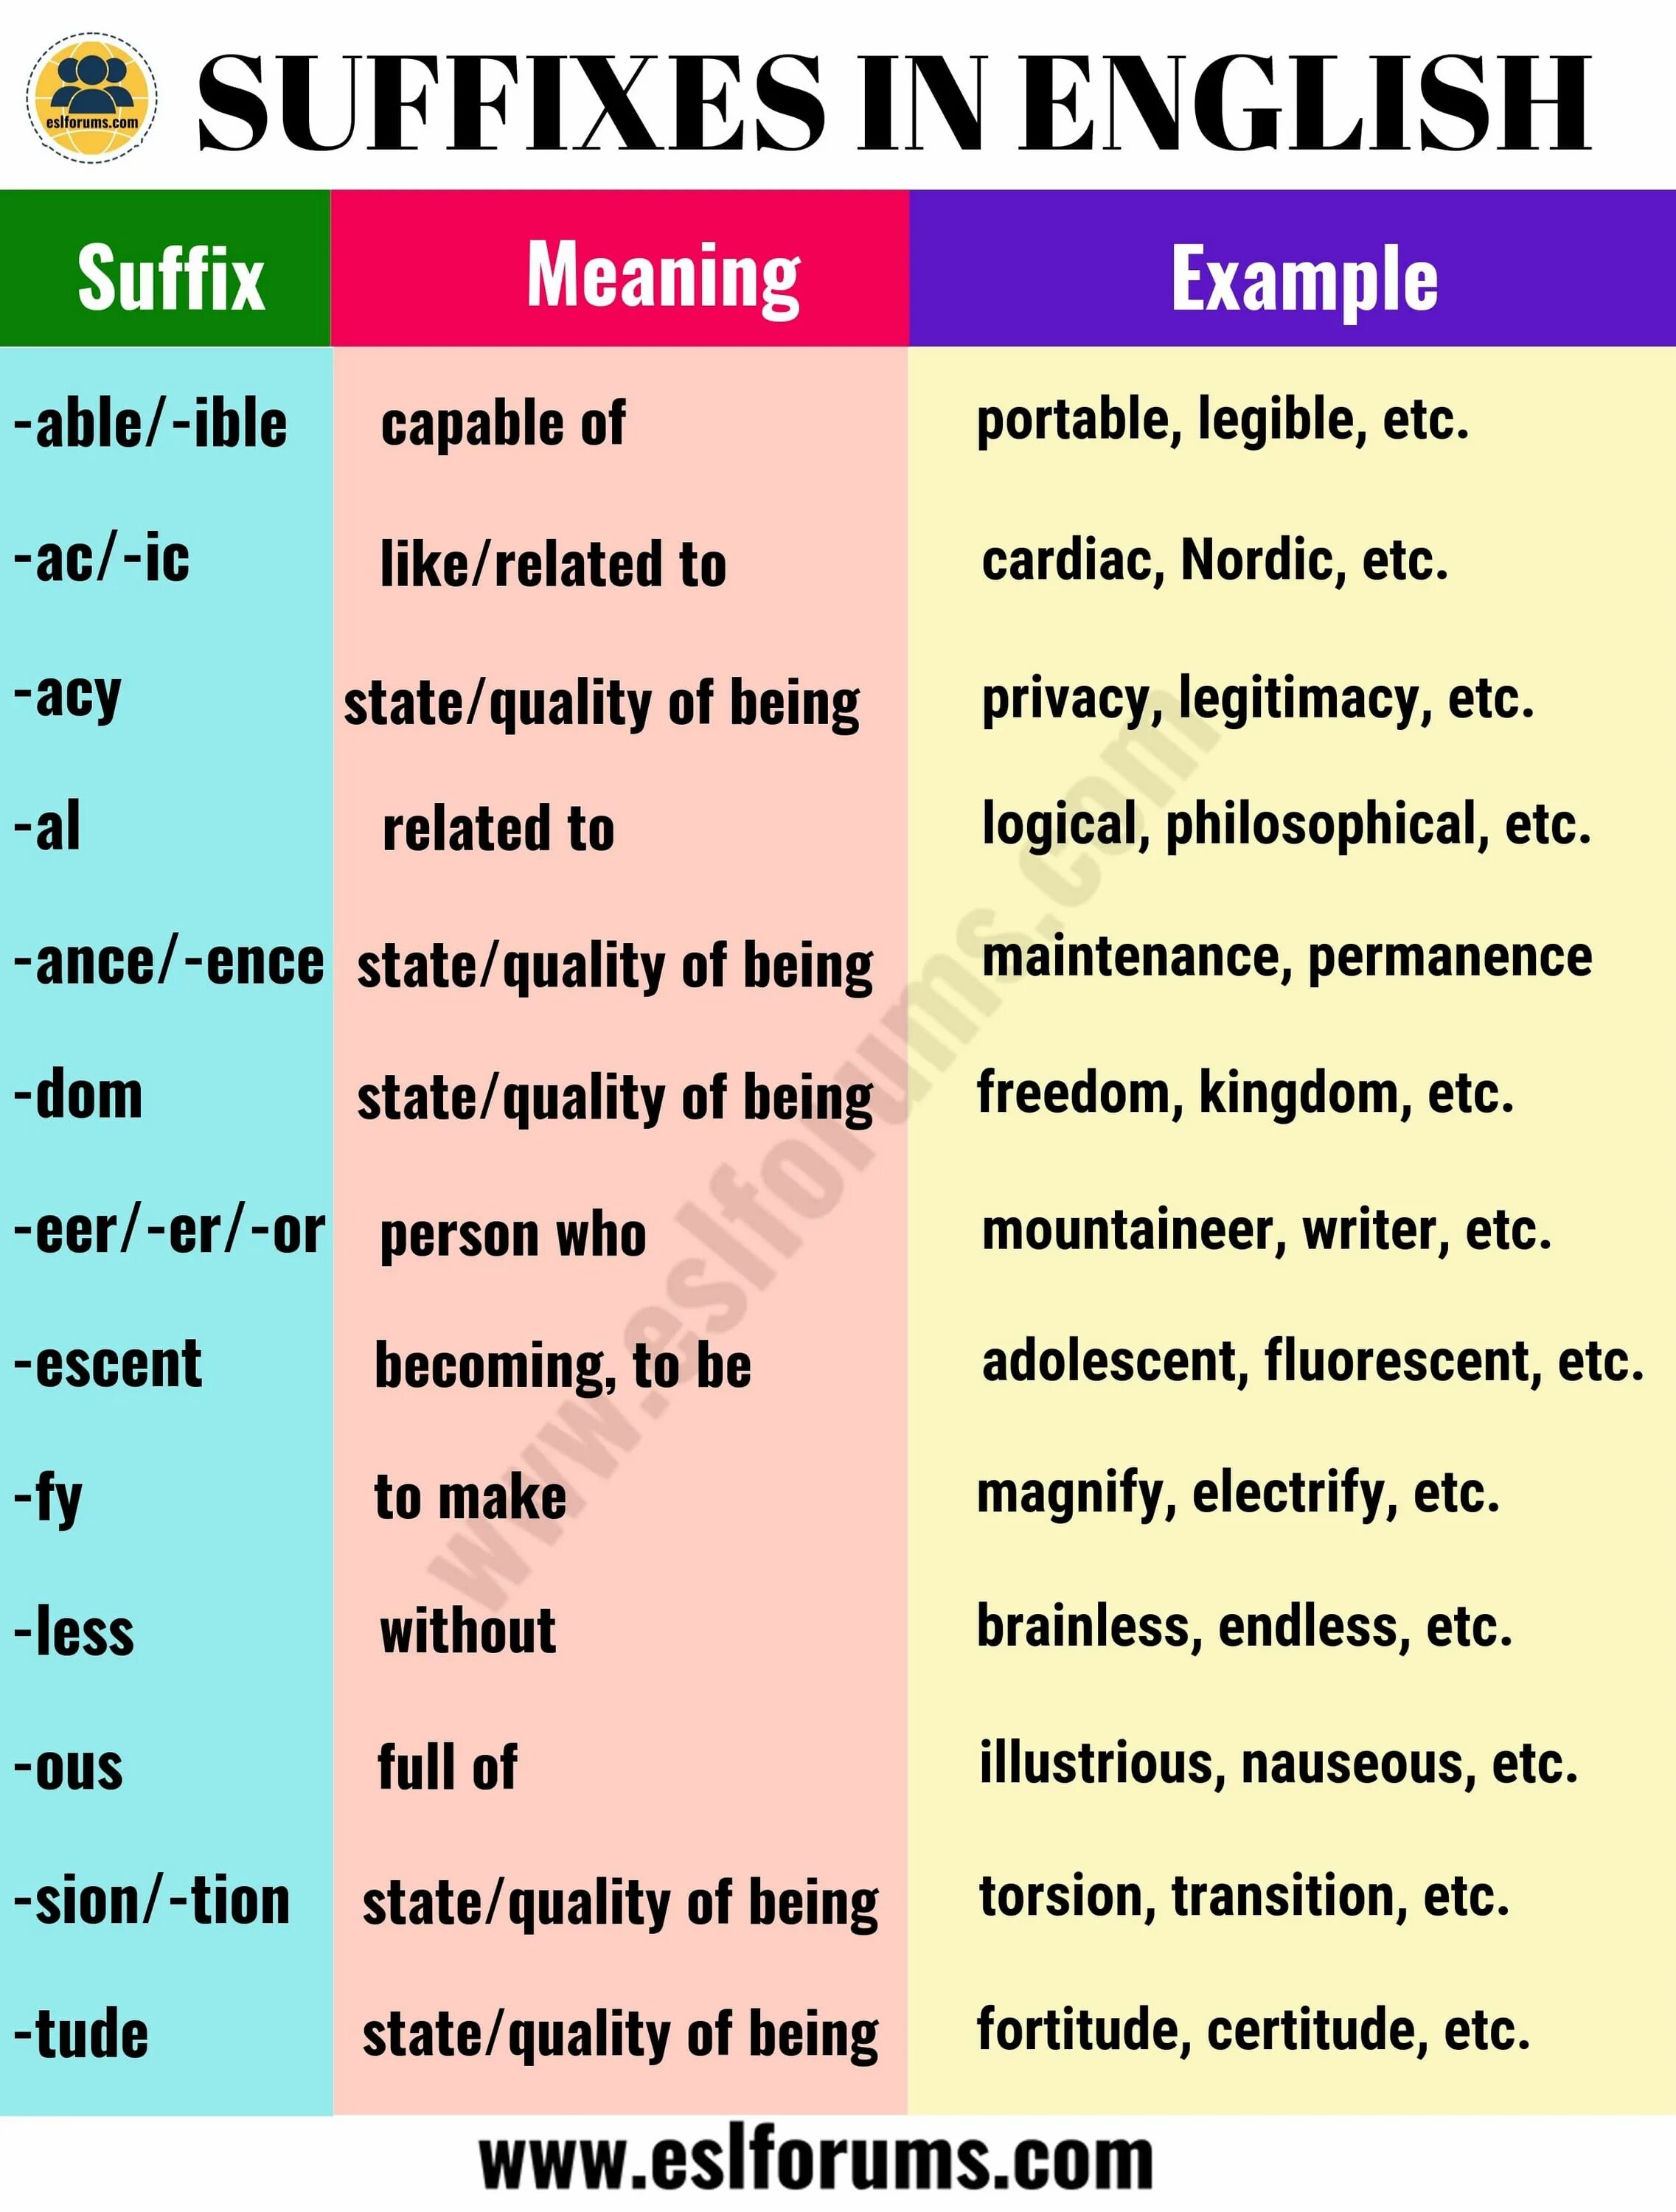 Suffixes in English. Prefixes and suffixes. English suffixes and prefixes. Prefix and suffix в английском.